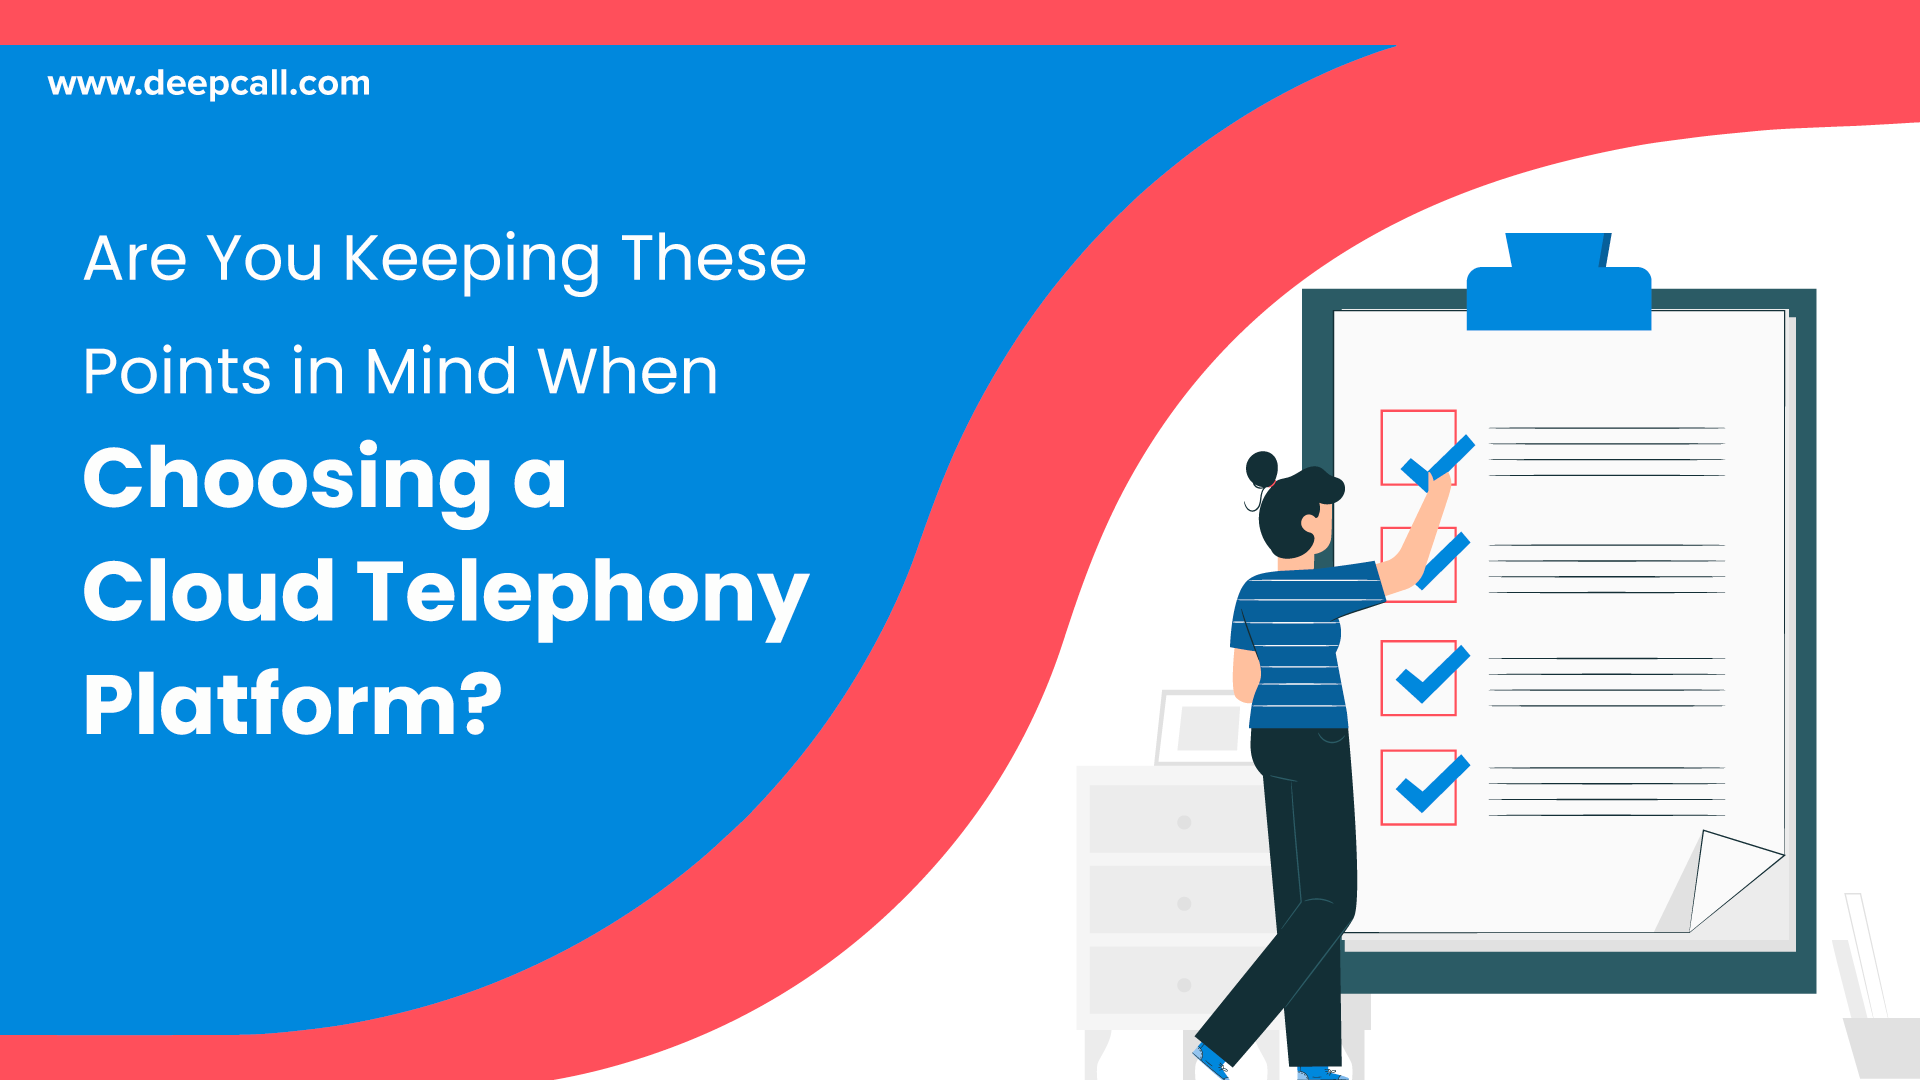 Are You Keeping These Points in Mind When Choosing a Cloud Telephony Platform?